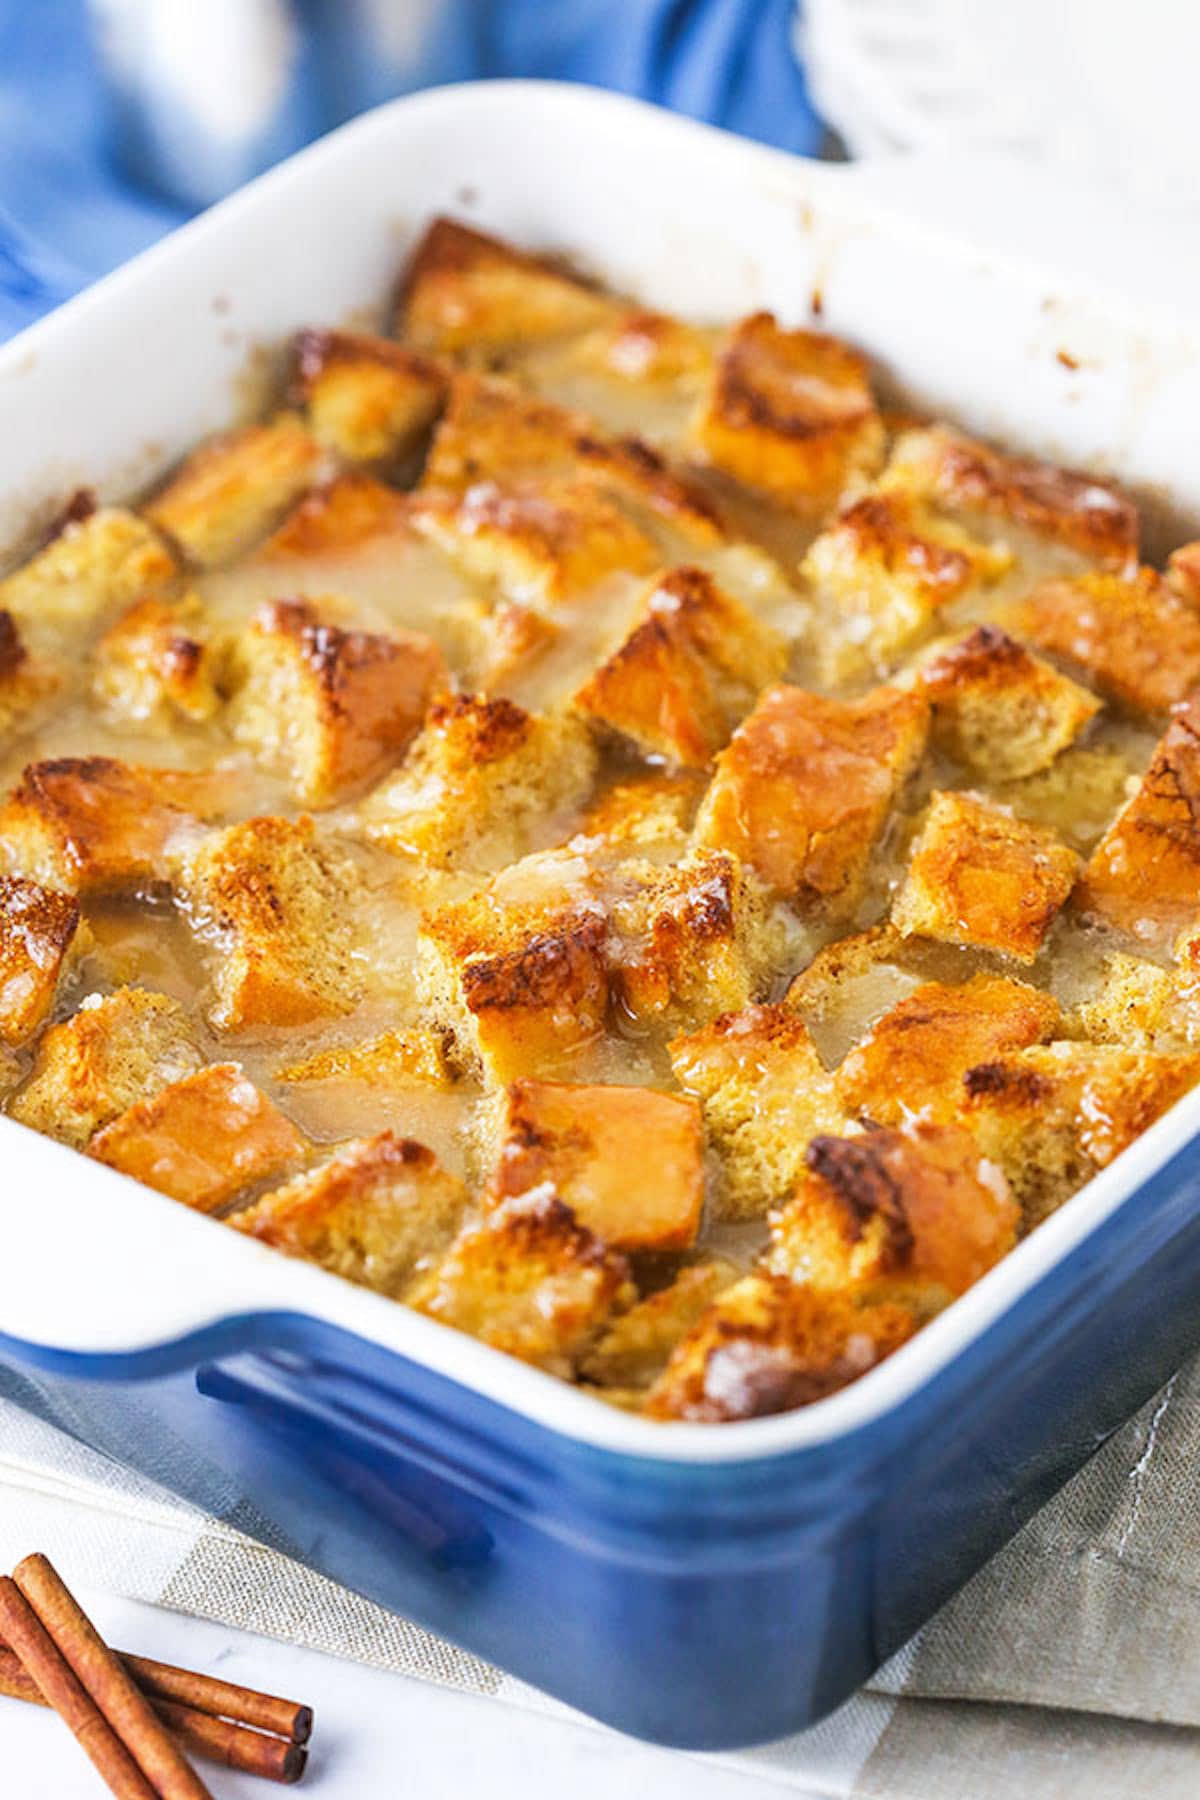 Freshly baked bread pudding in a pan next to two cinnamon sticks.